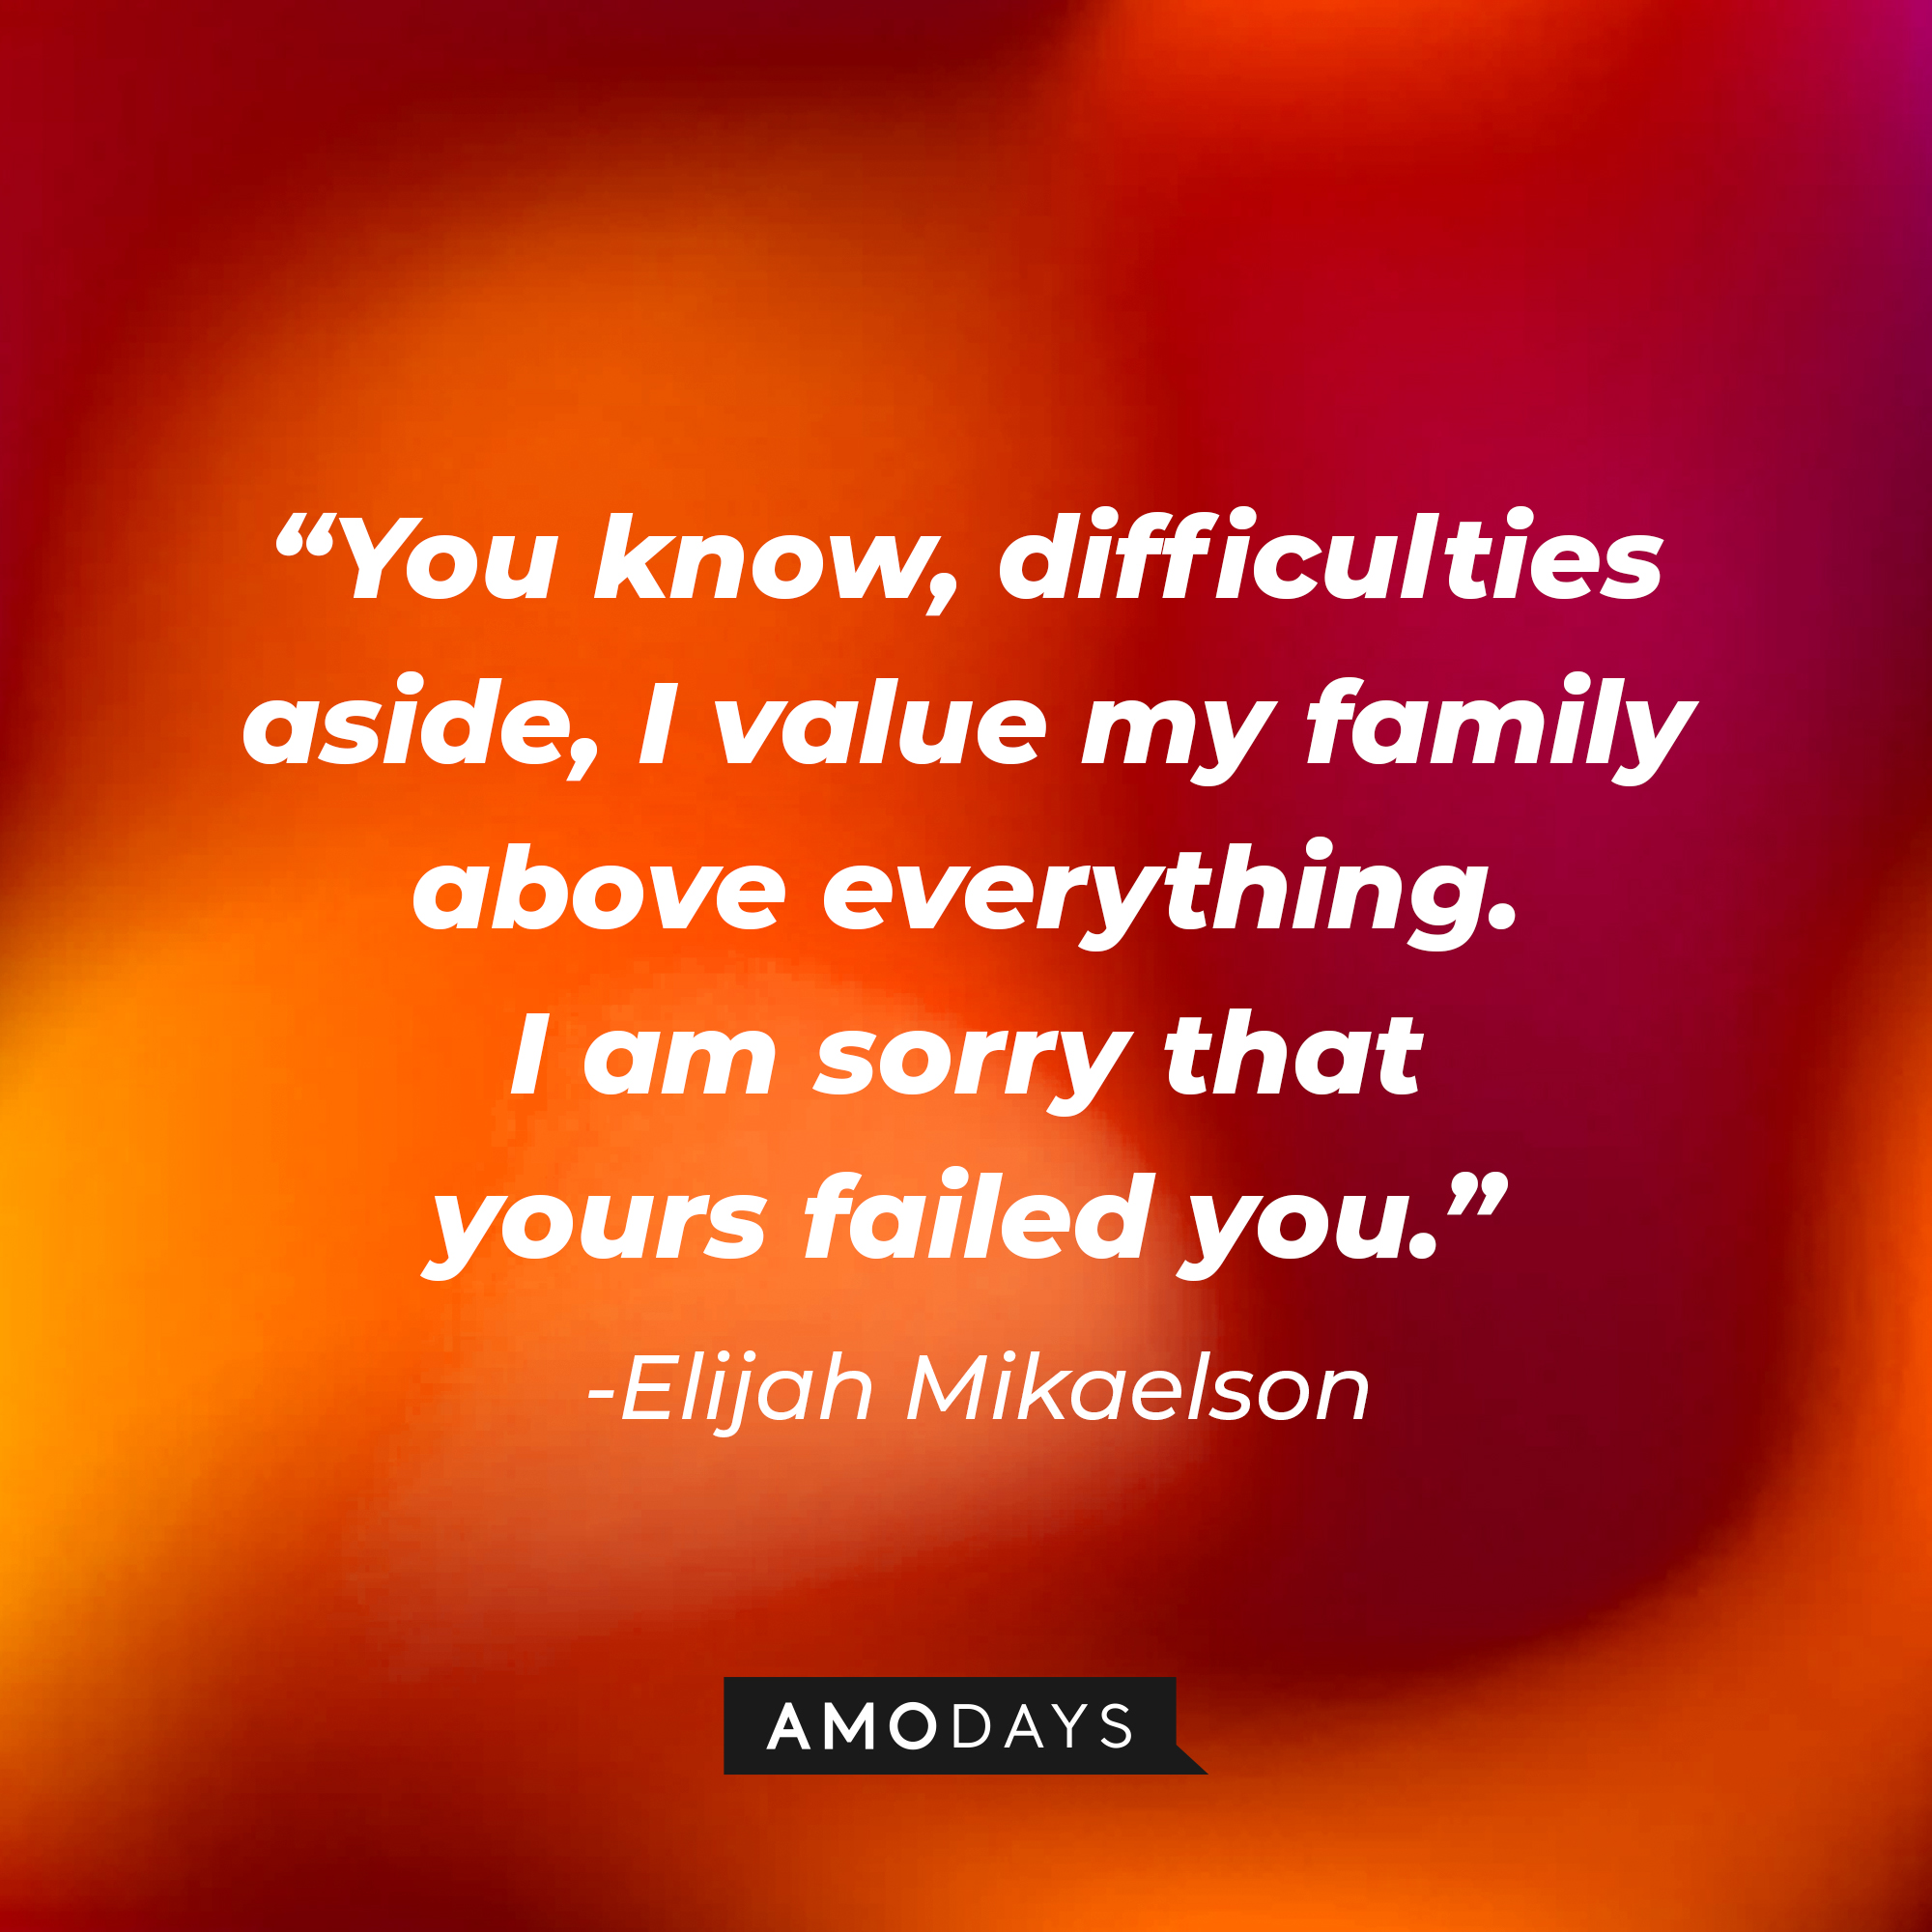 Elijah Mikaelson's quote: "You know, difficulties aside, I value my family above everything. I am sorry that yours failed you." | Source: facebook.com/thevampirediaries